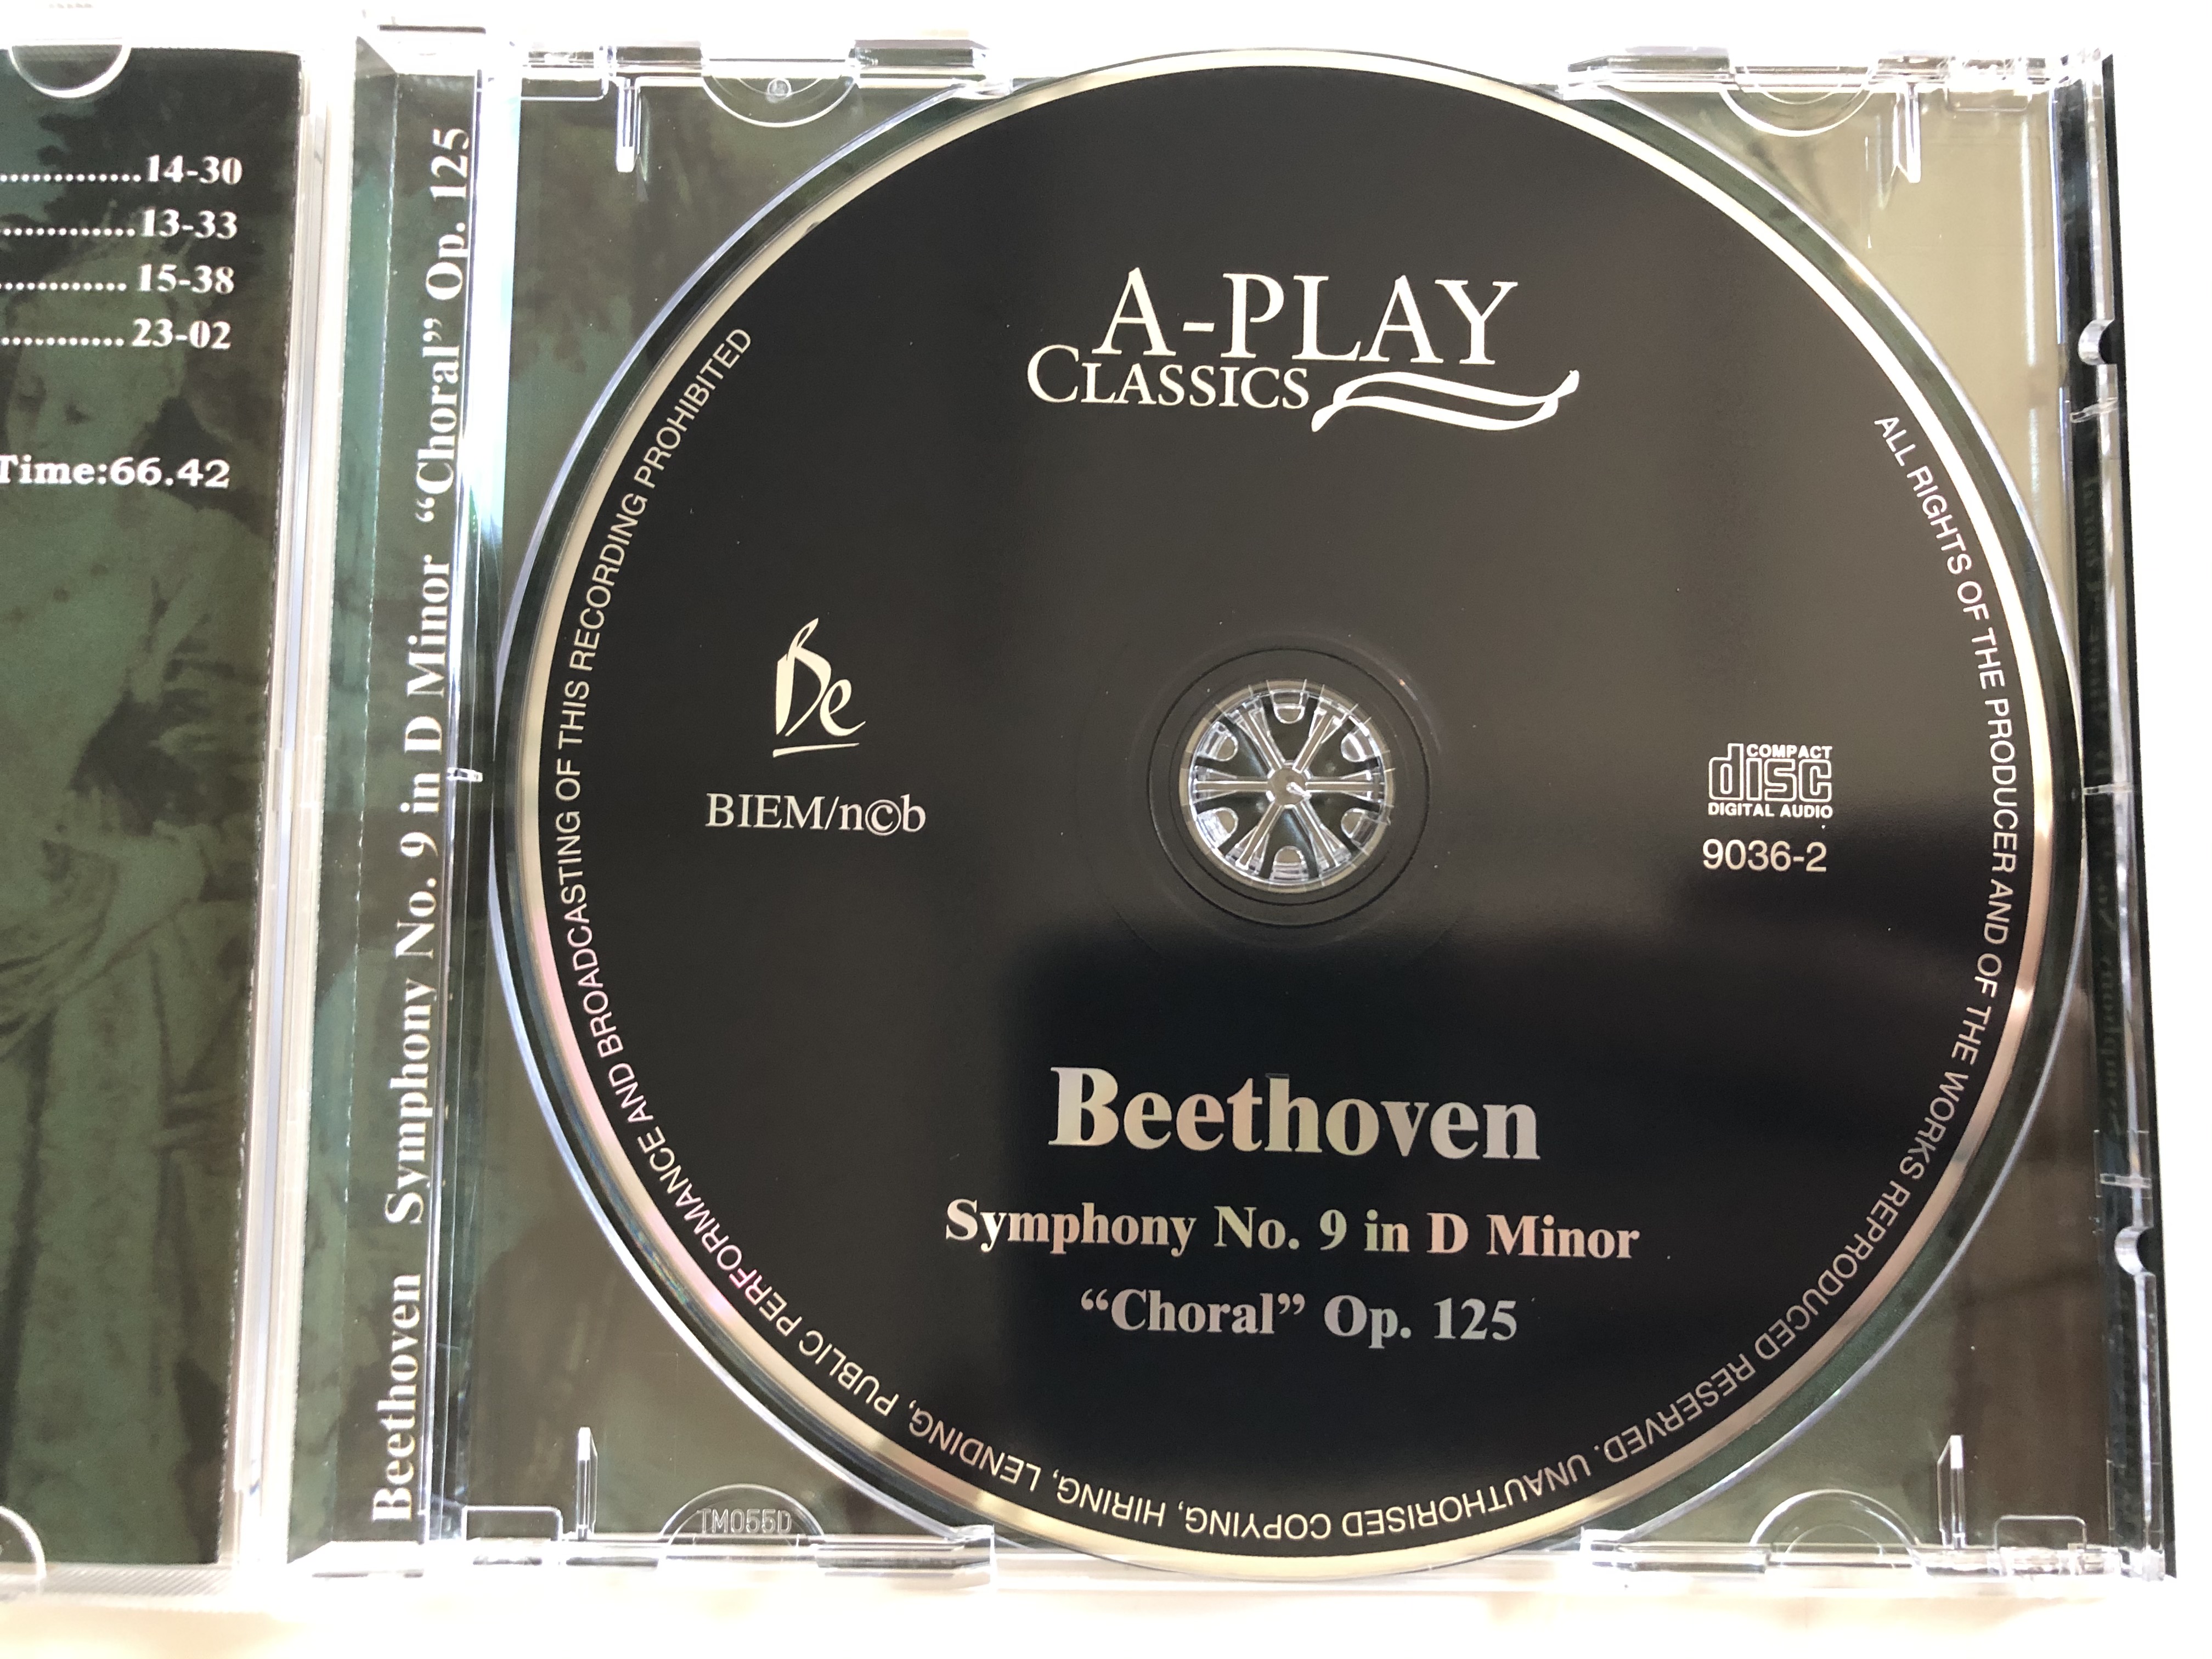 beethoven-symphony-no.-9-in-d-minor-choral-op.-125-state-of-mexico-symphony-orchestra-chorus-conductor-enrique-batiz-a-play-classics-audio-cd-2001-9036-2-4-.jpg